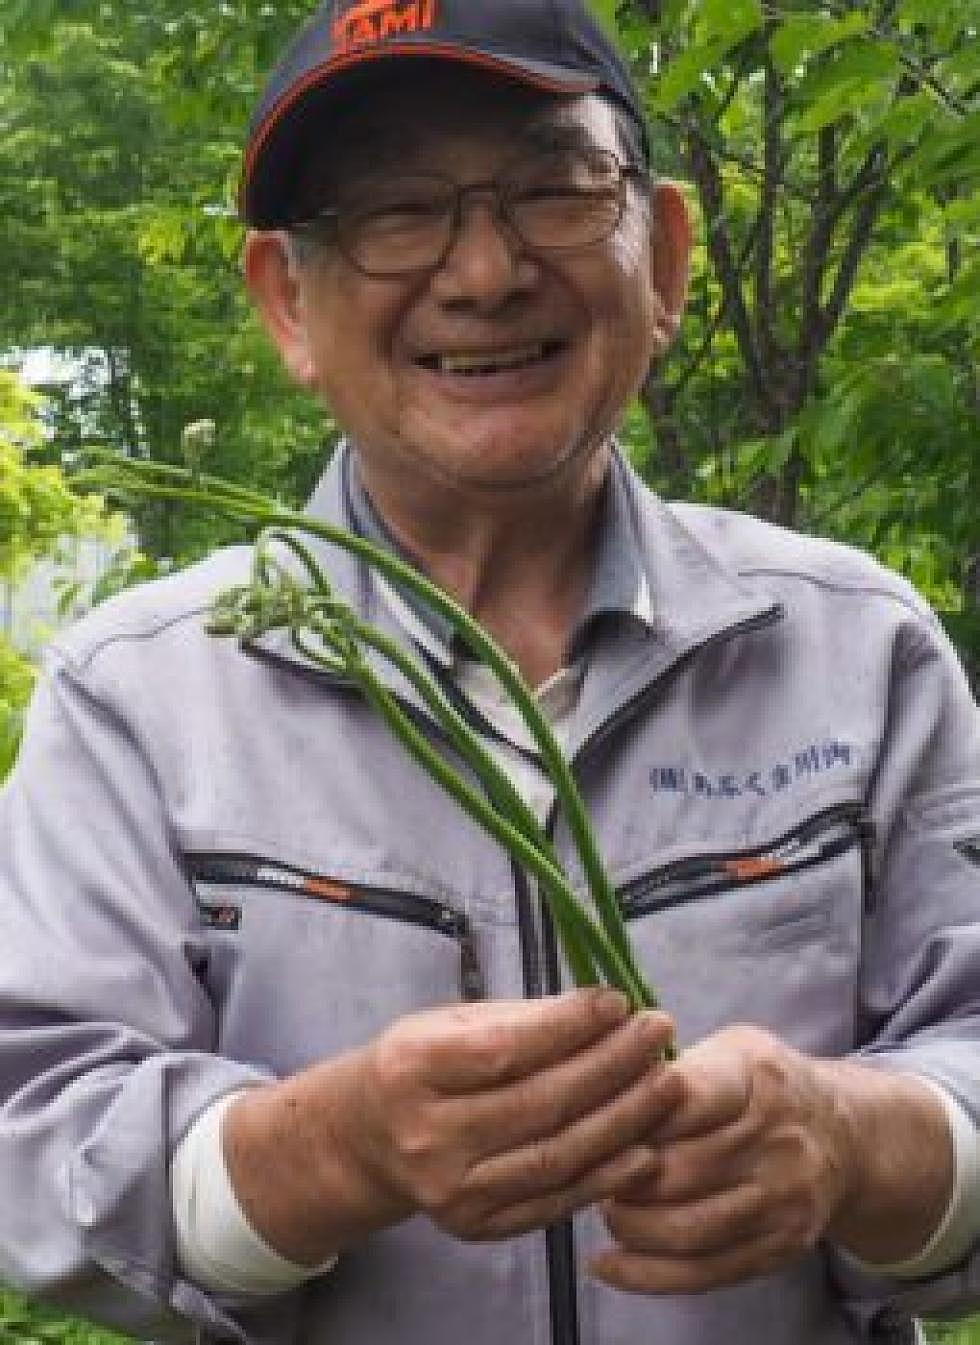 UM to Fukushima: After radiation release, villagers can gather, but not eat, wild plants